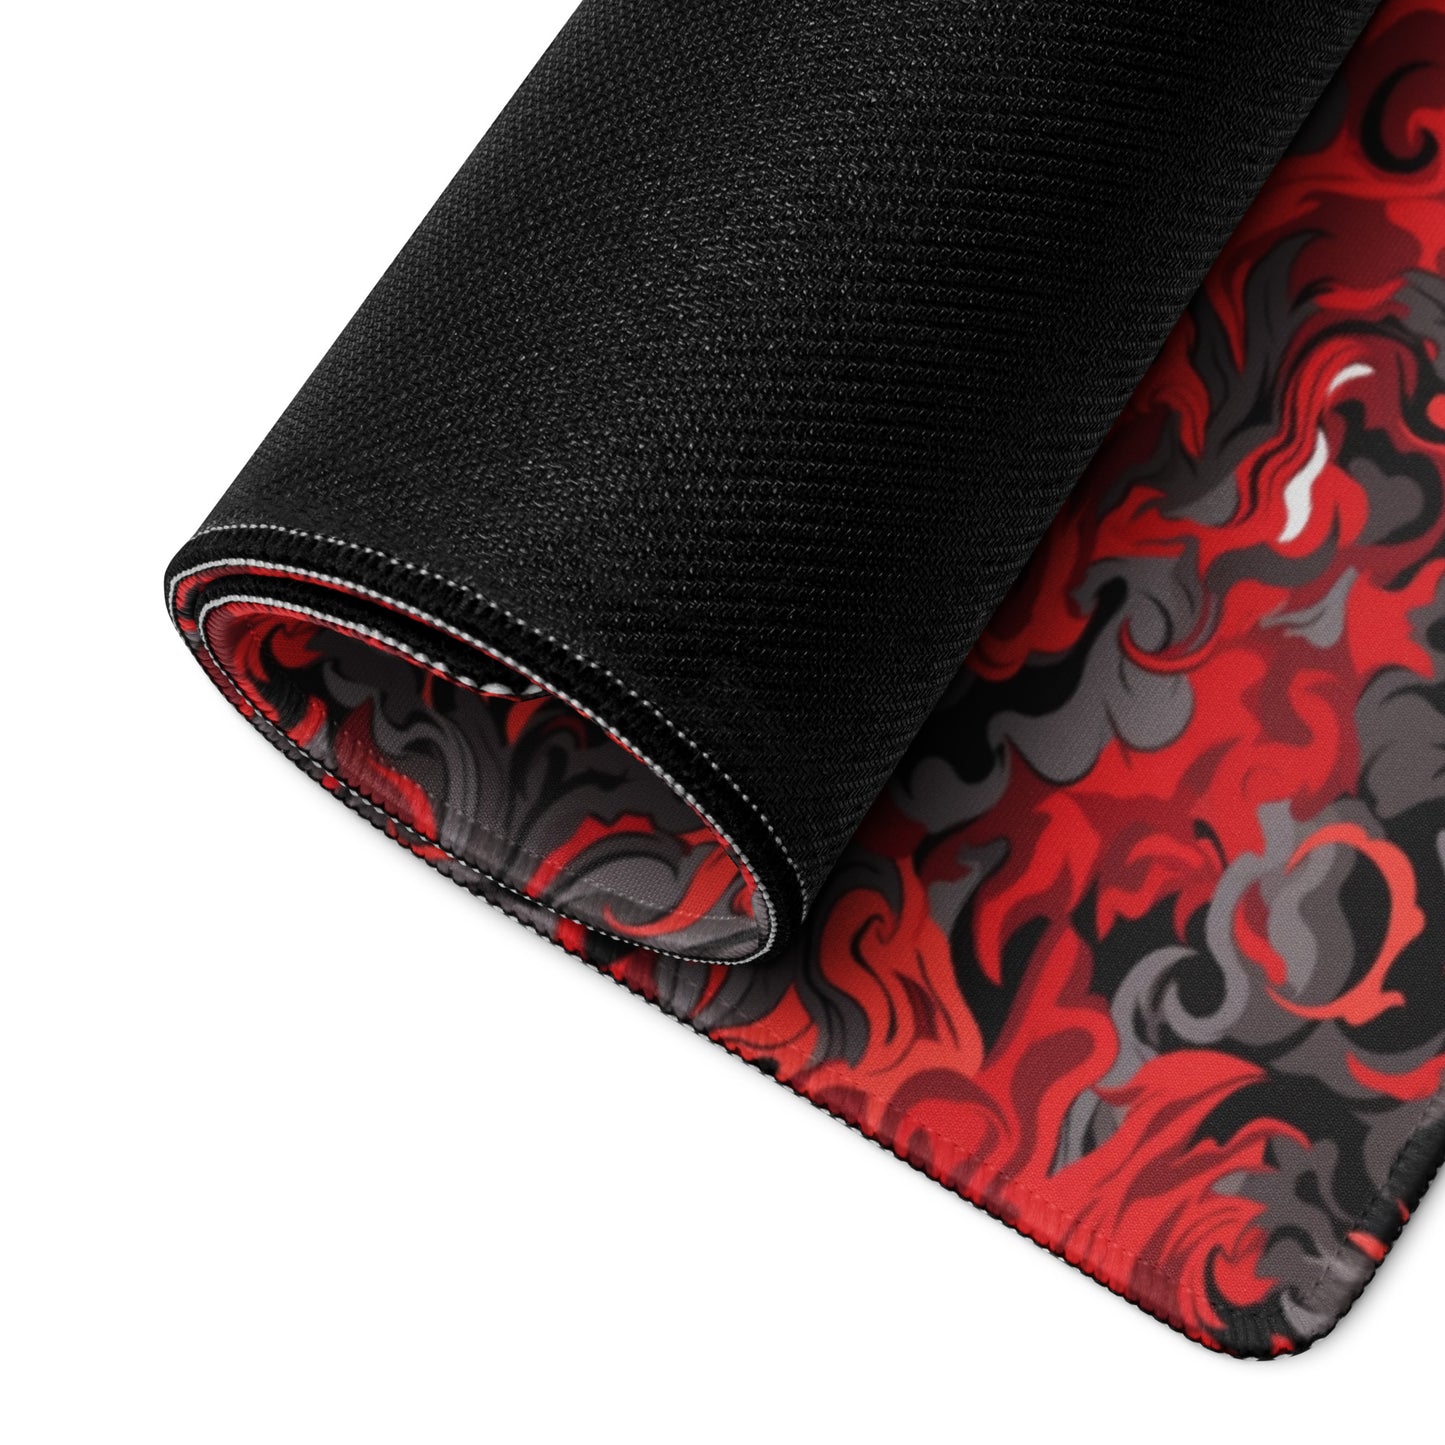 A 36" x 18" desk pad with a black and red camo pattern rolled up.